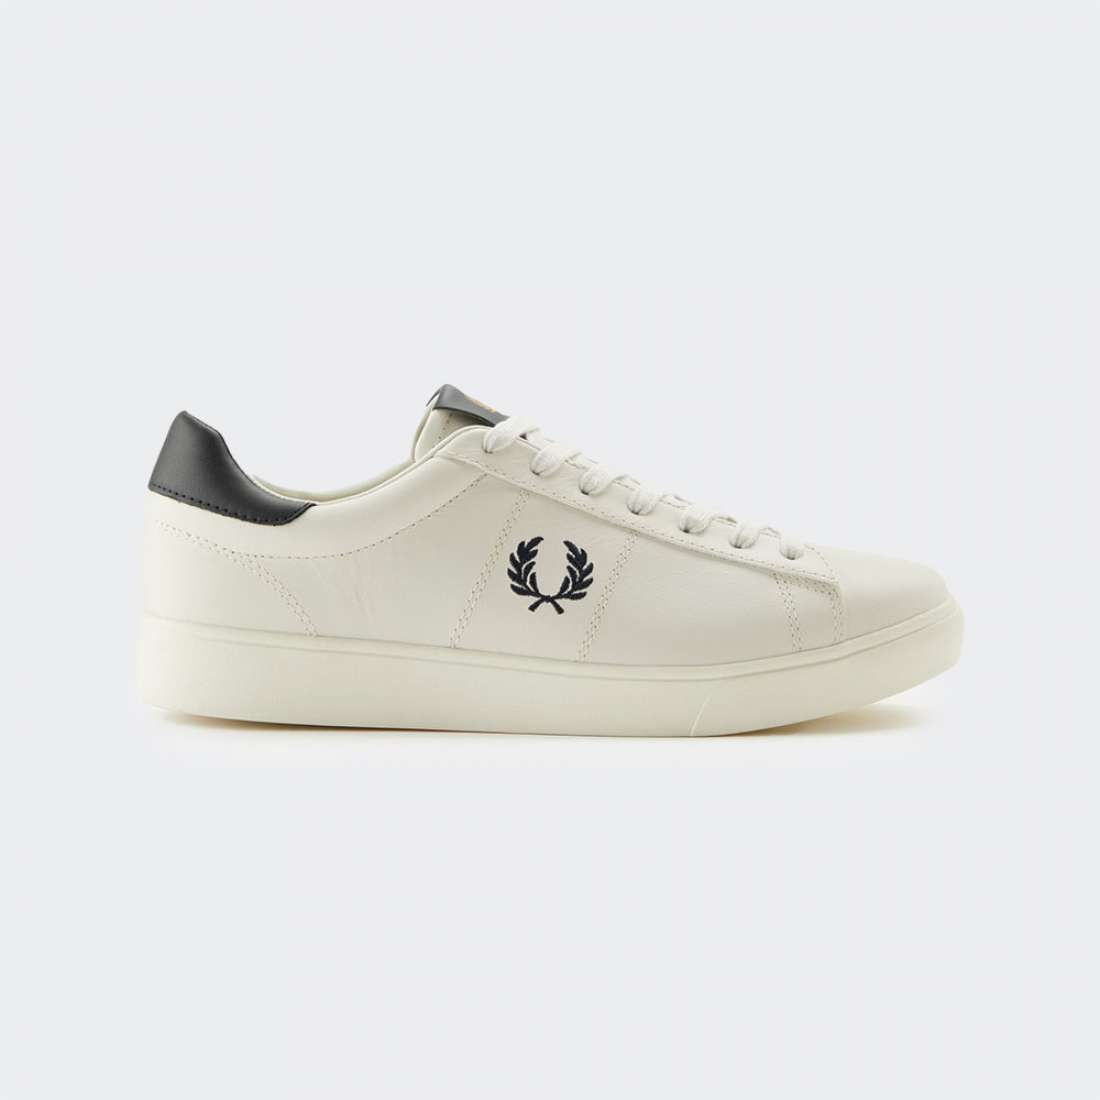 FRED PERRY SPENCER PORCELAIN